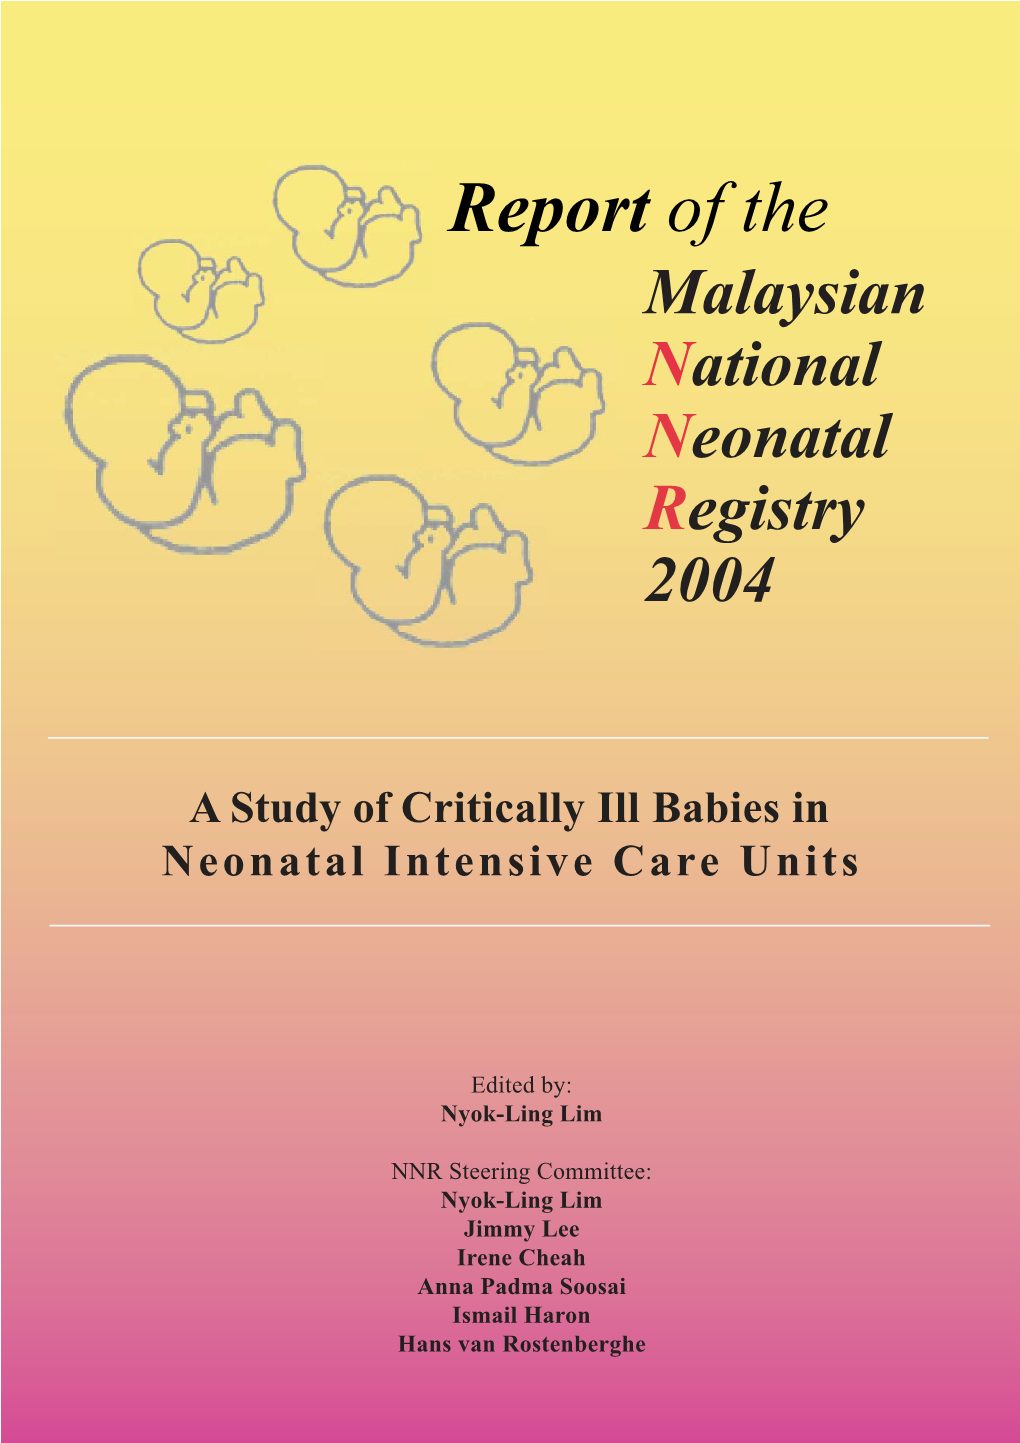 Report of the Malaysian National Neonatal Registry 2004